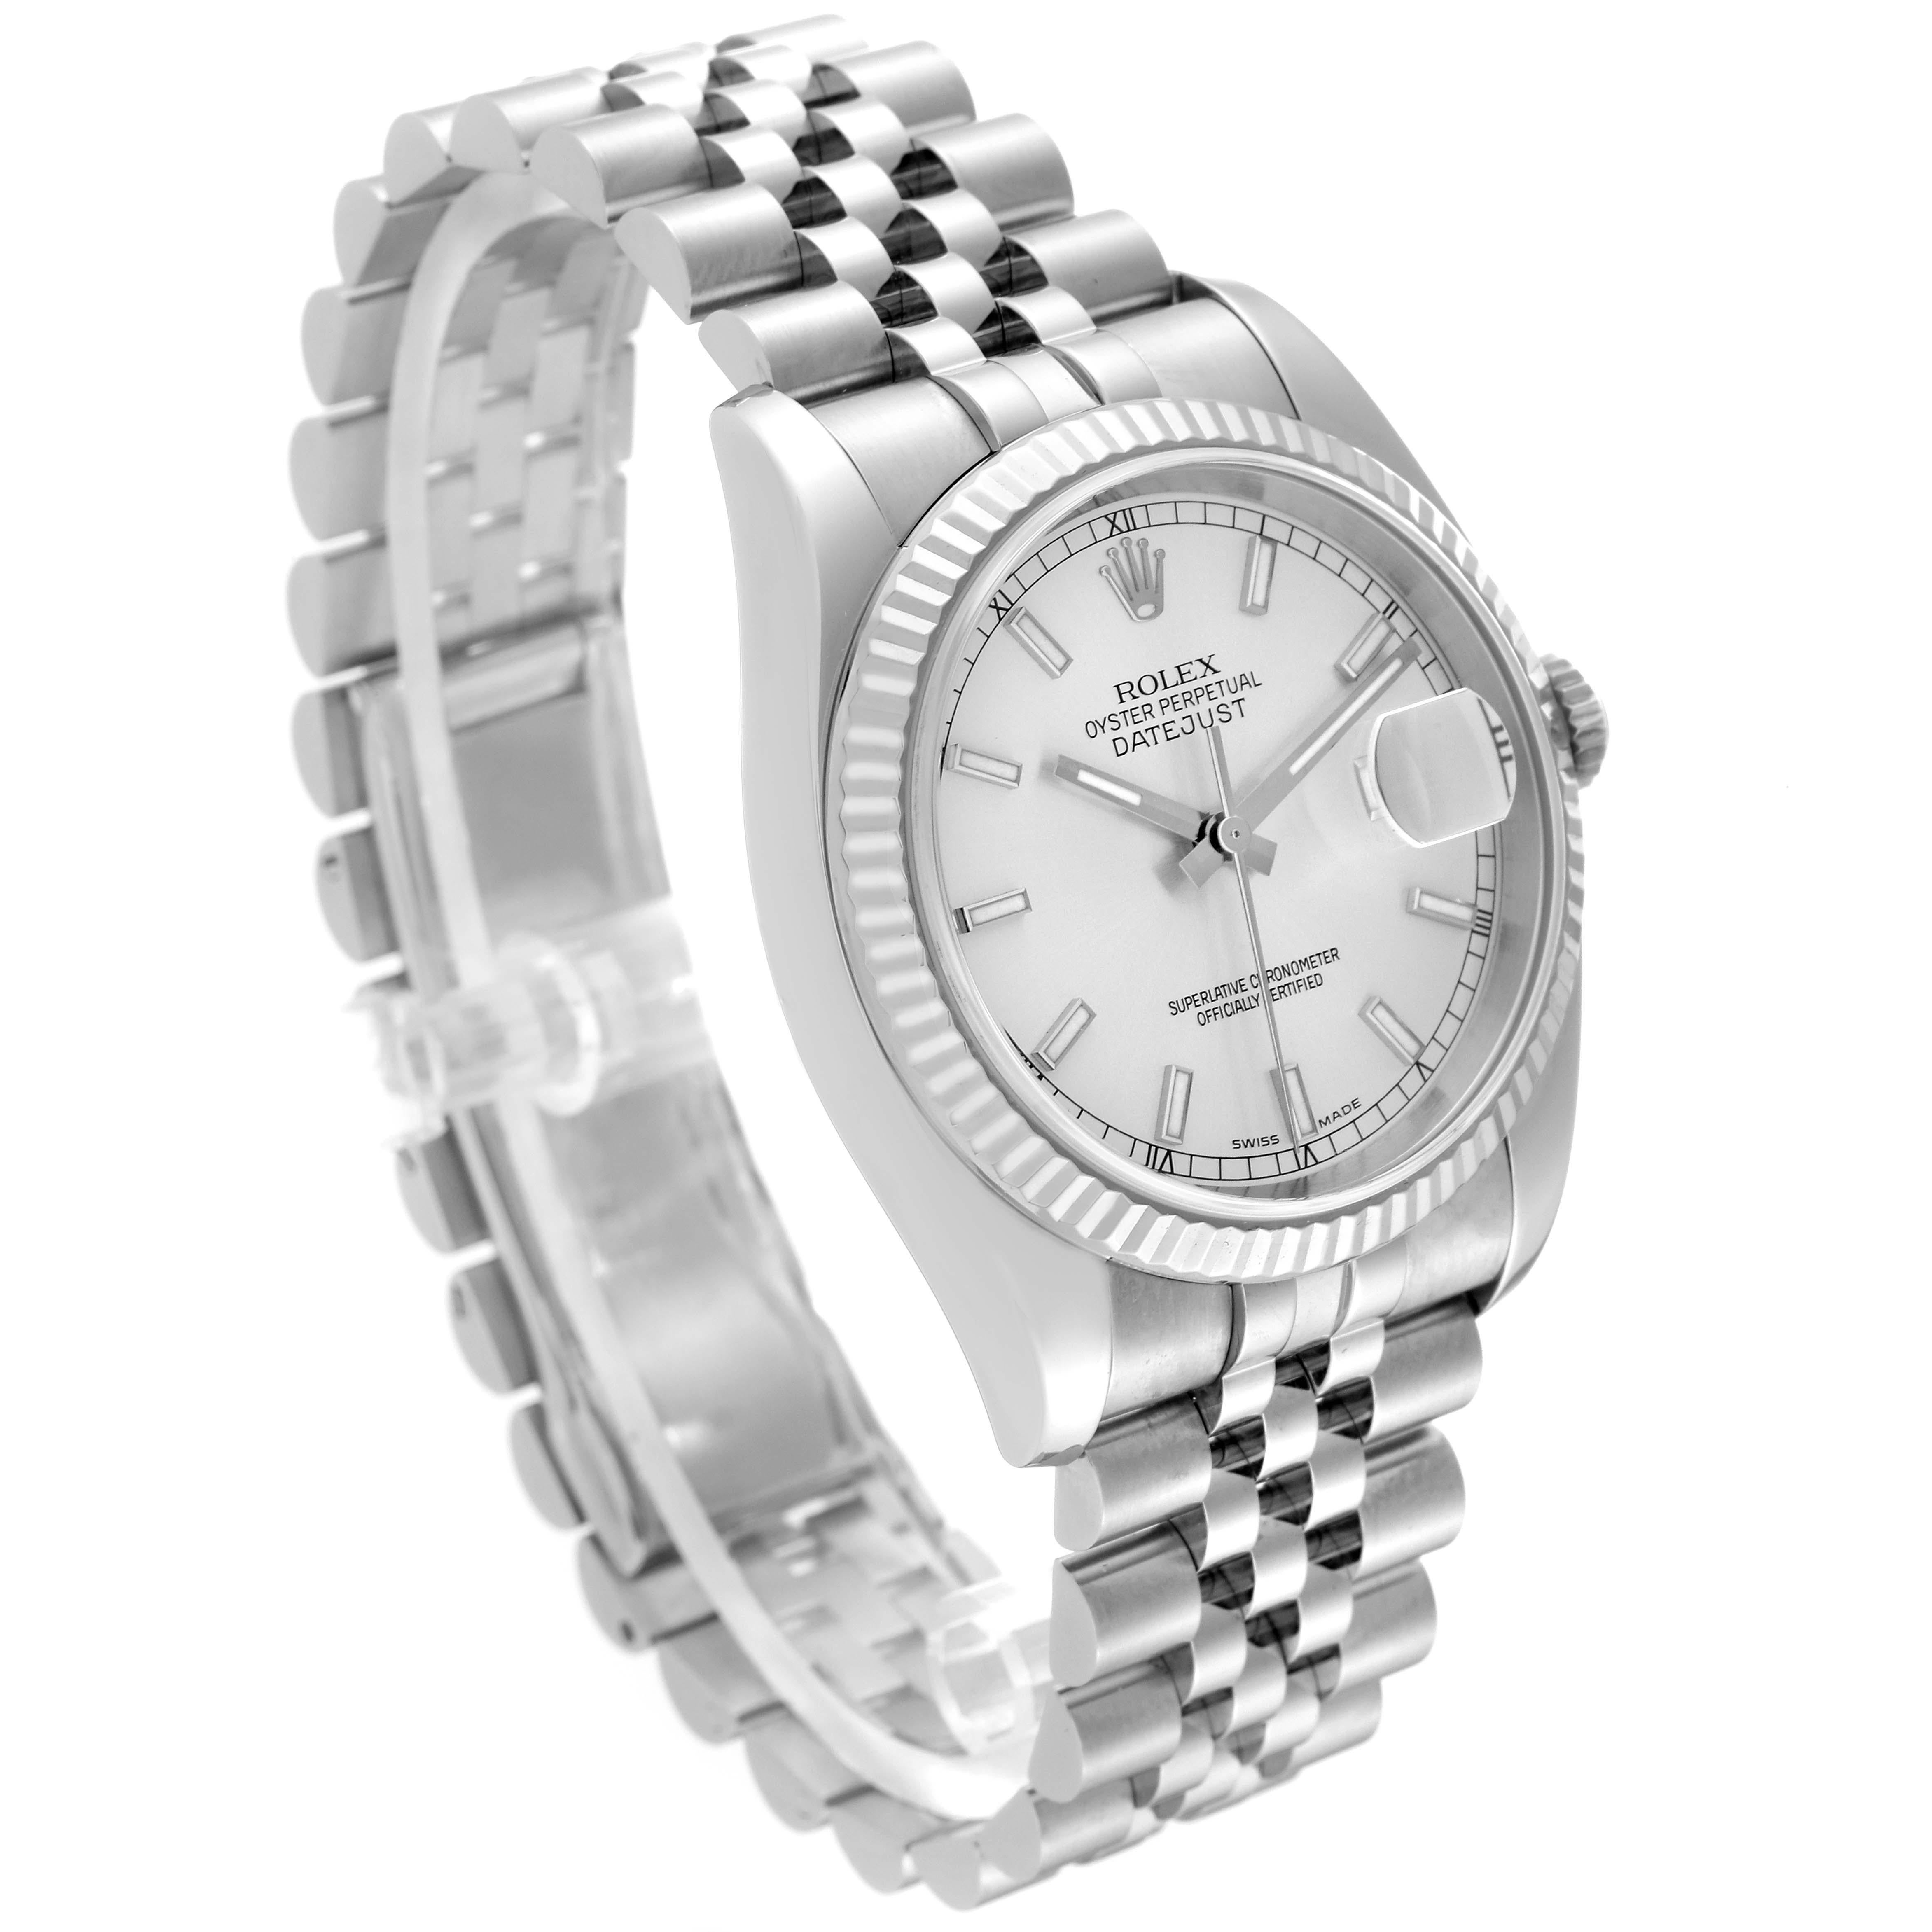 Rolex Datejust Steel White Gold Silver Dial Mens Watch 116234 Box Papers For Sale 4